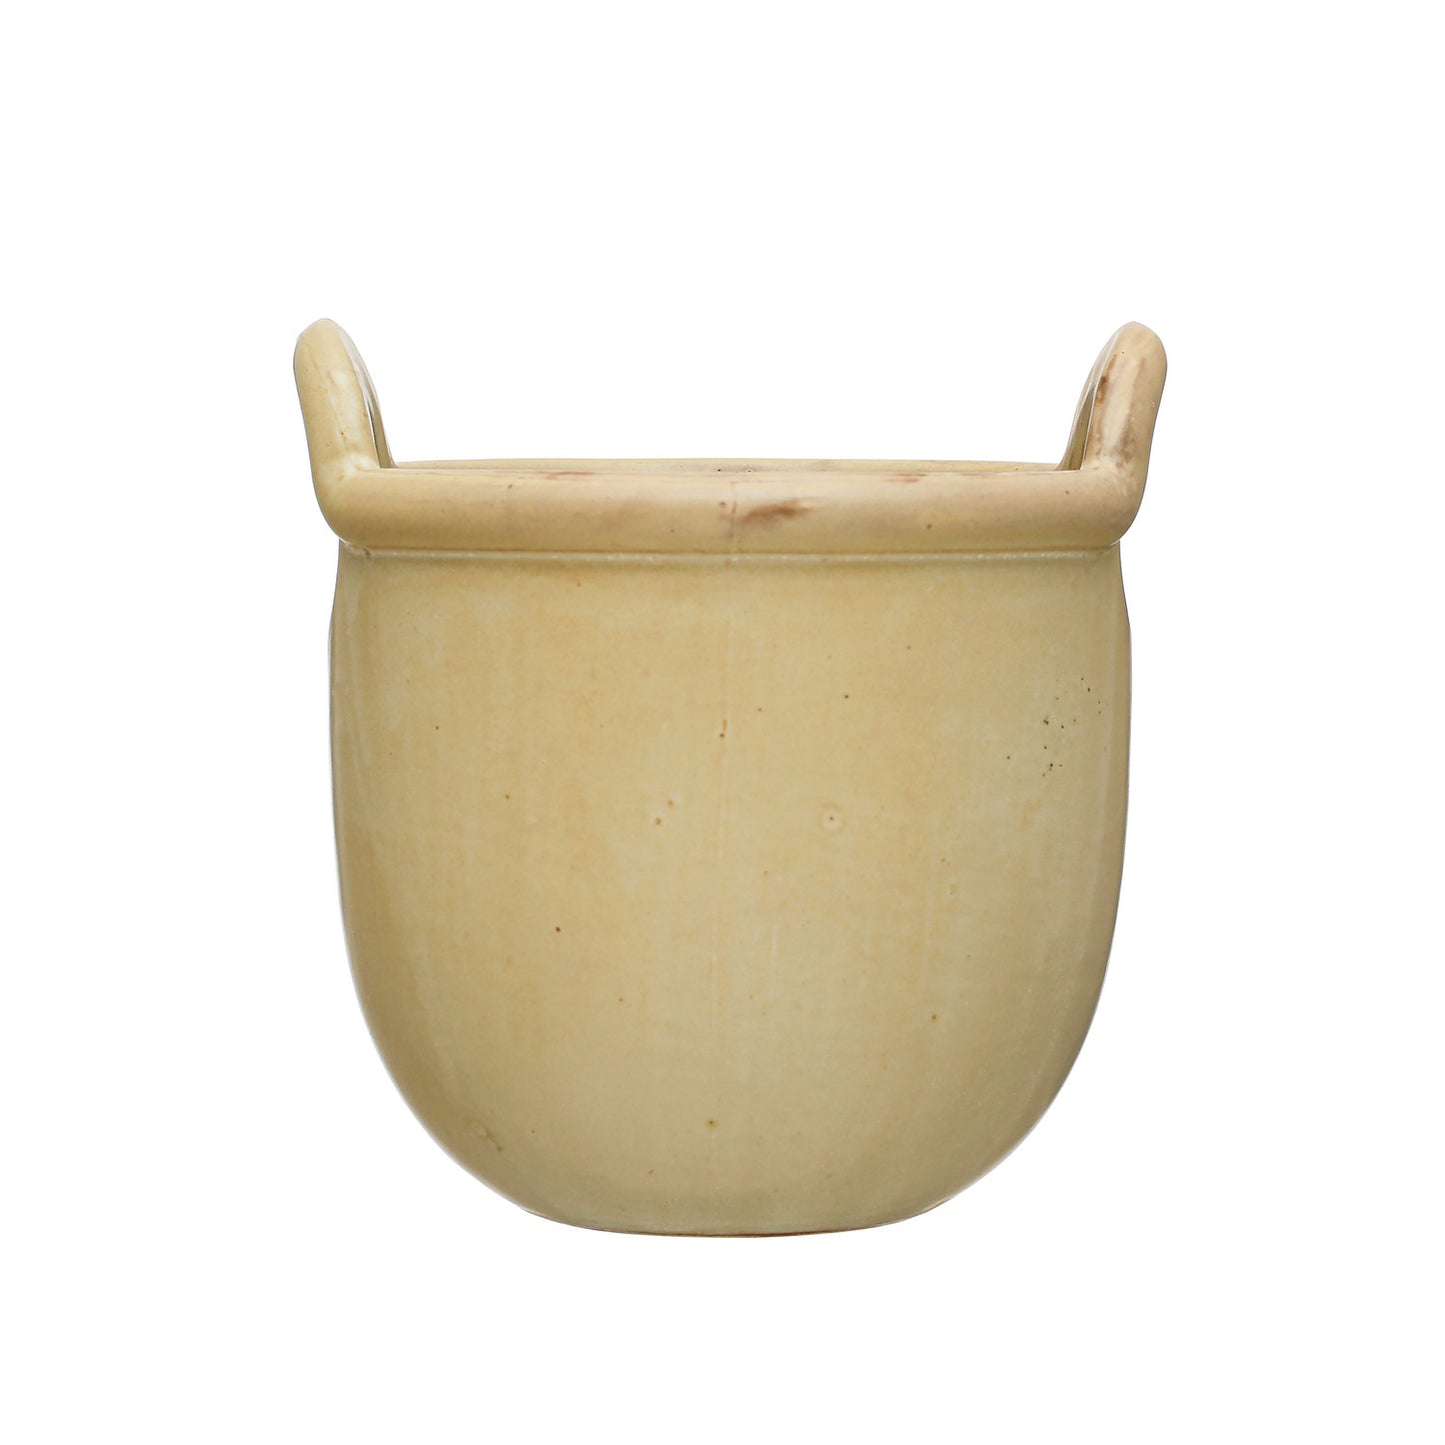 Stoneware Crock w/ Handles, Reactive Glaze, Tan Color (Each One Will Vary)